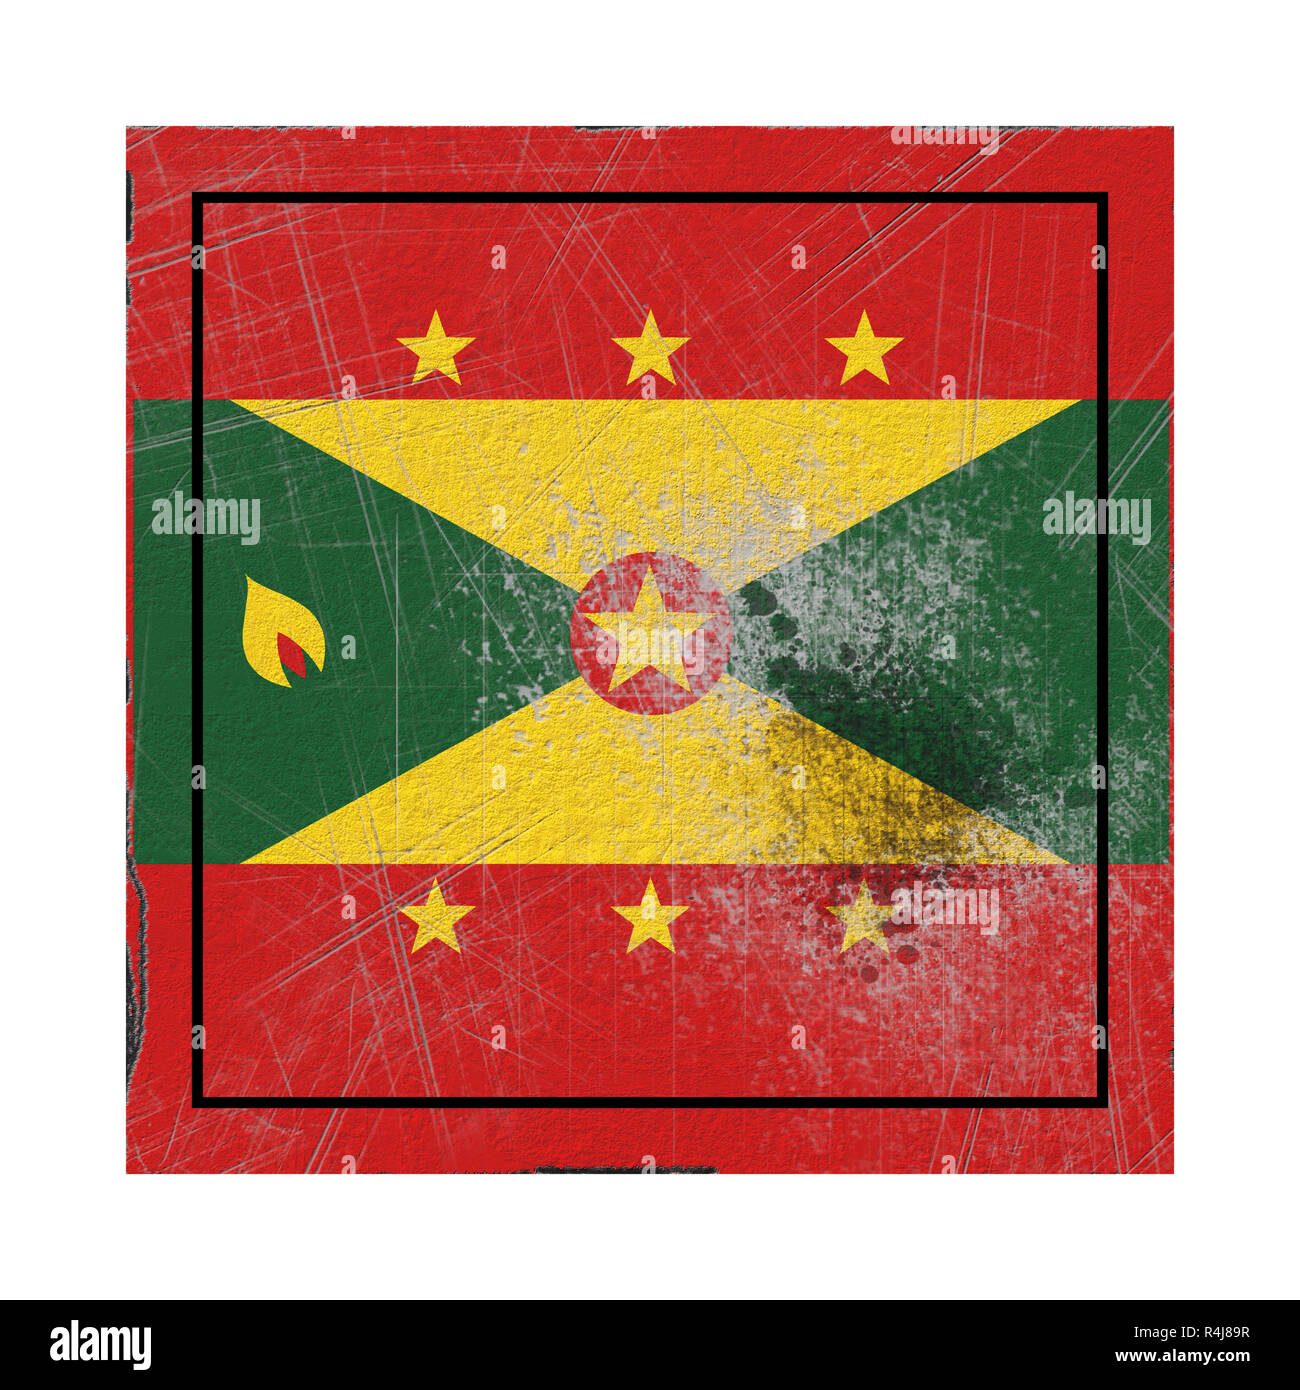 3d rendering of an old Grenada flag in a concrete square Stock Photo